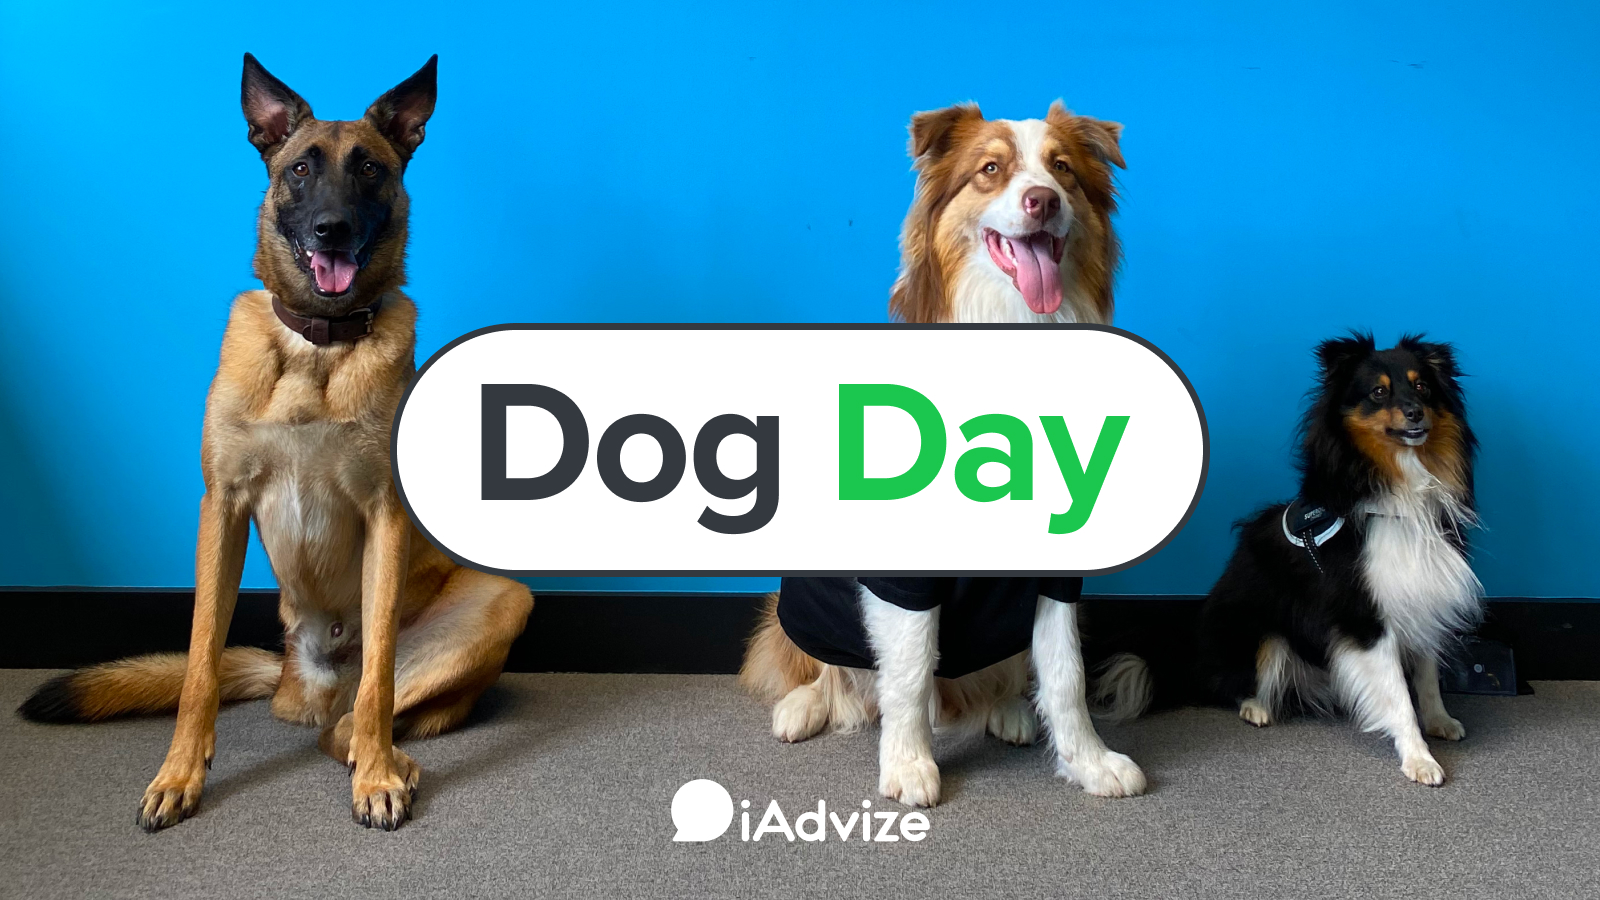 Dog's Day at iAdvize: The Benefits of Bringing Your Dog to Work